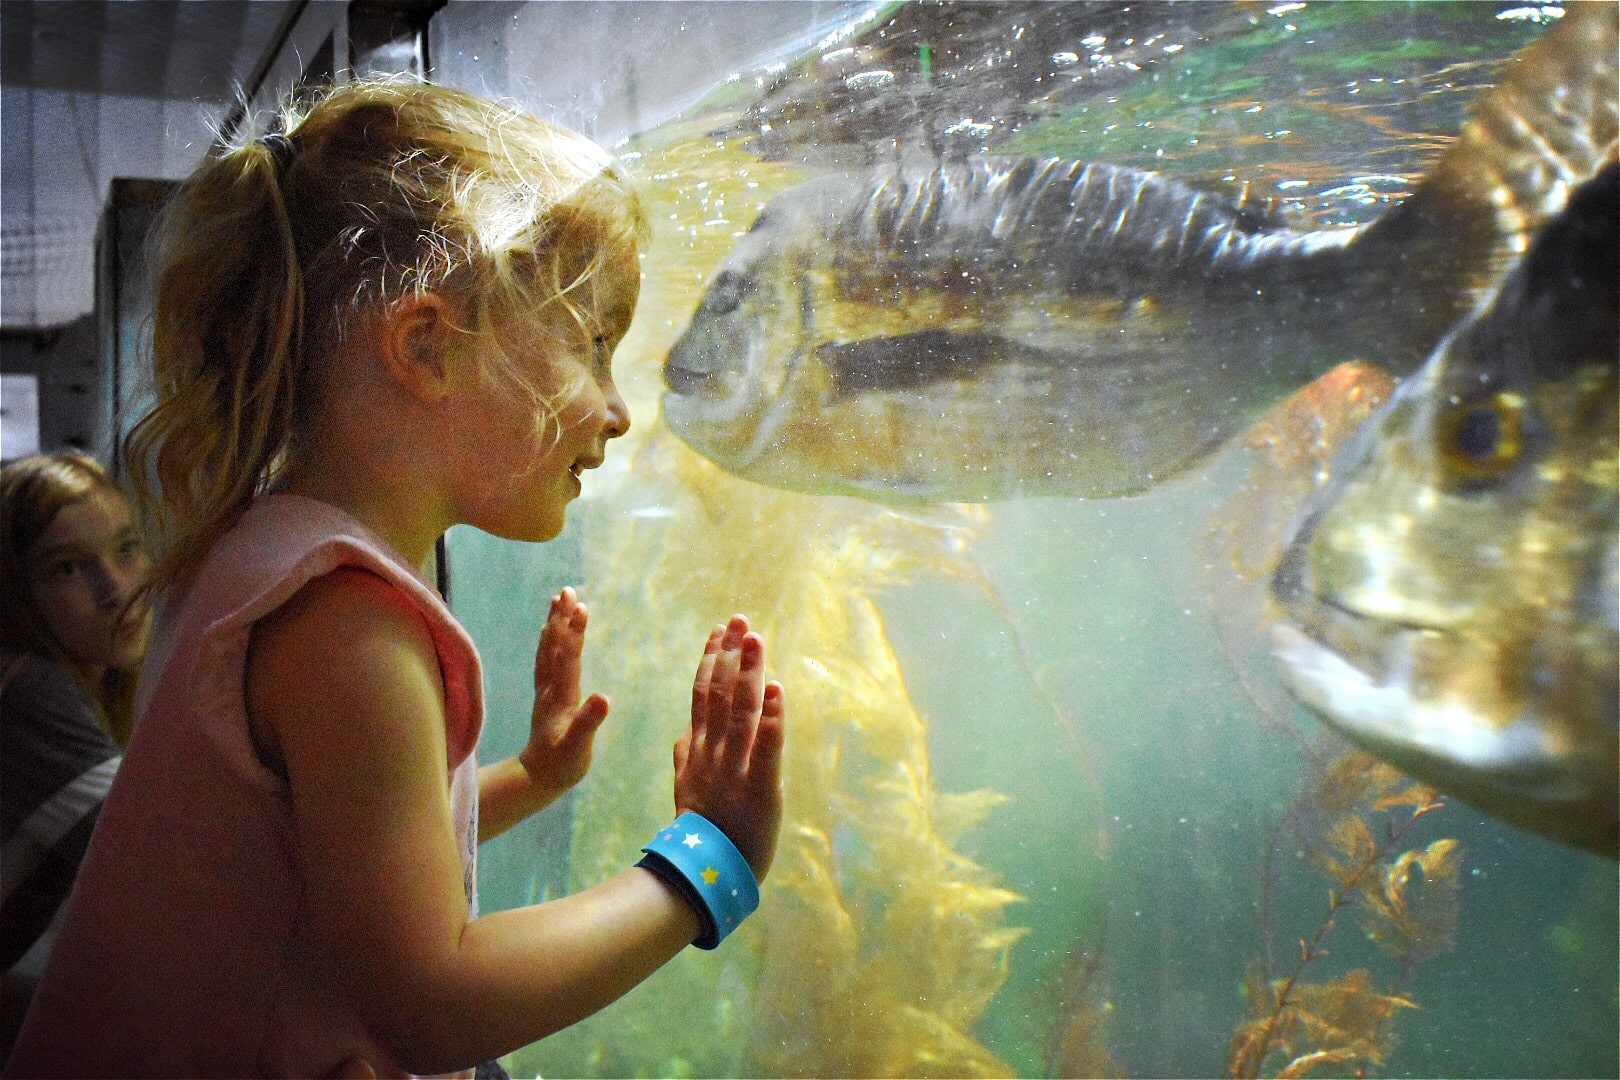 A young girl leans against the glass of a large fish tank in the EcoWorld Aquarium & Wildlife Rehabilitation Centre in Picton, New Zealand. Two large fish swim by the glass.